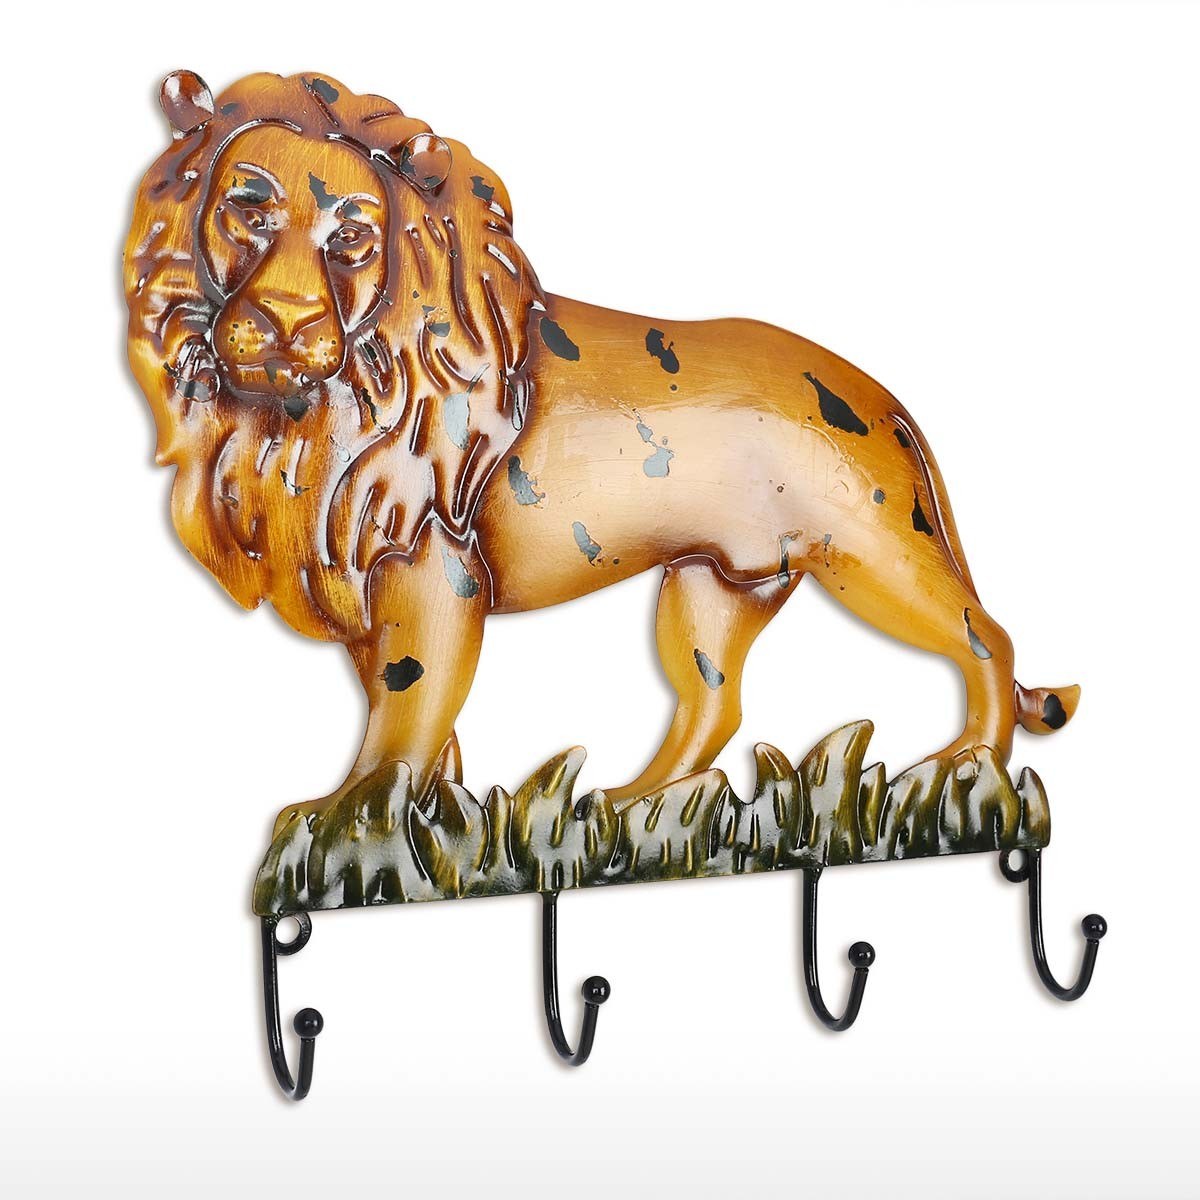 Get the power of a whole pride of lions with this lion wall hook